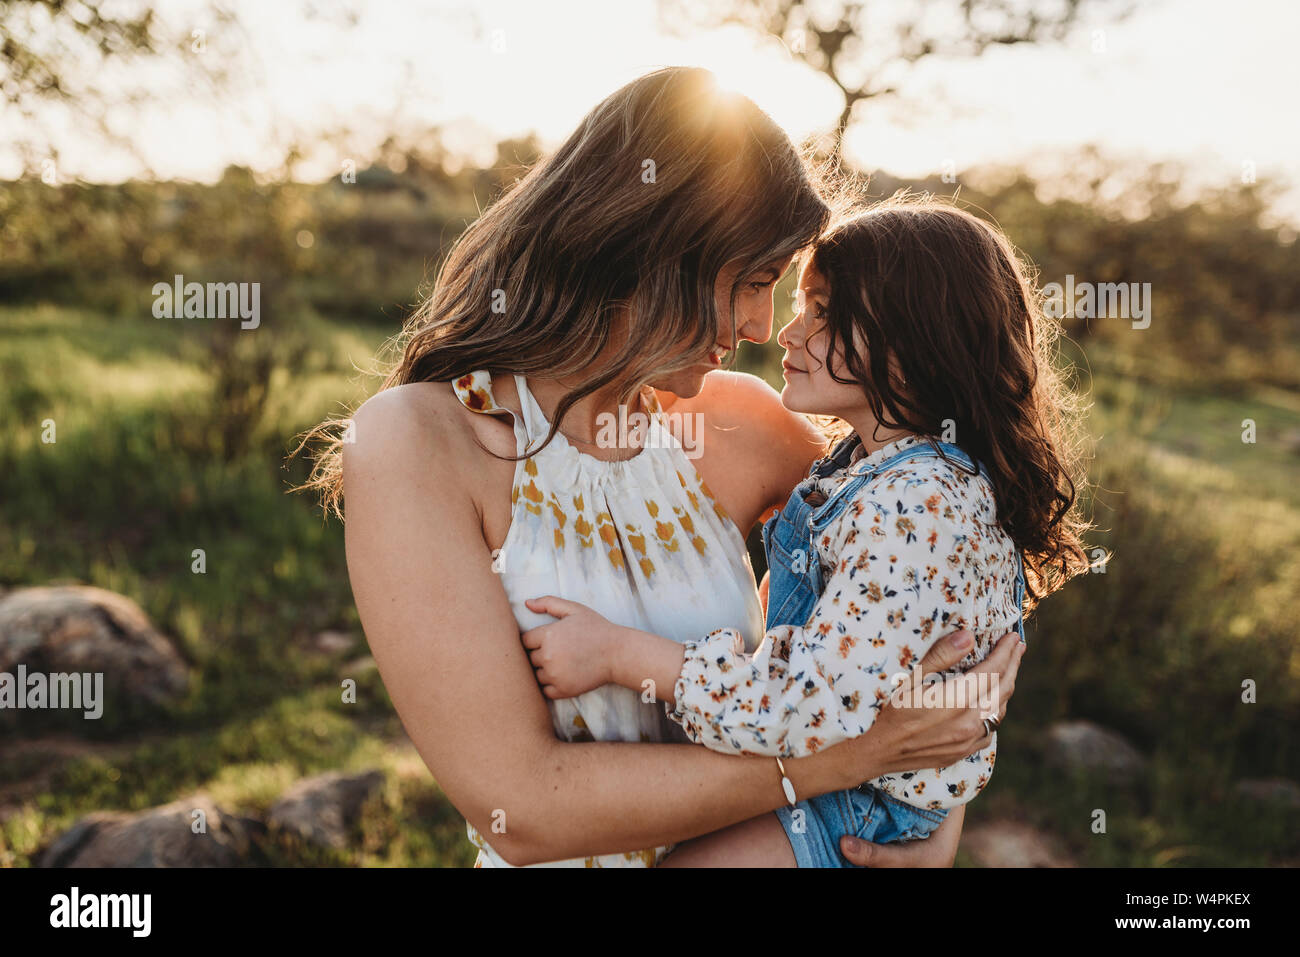 Young mother holding daughter and cuddling in bright california field Stock Photo